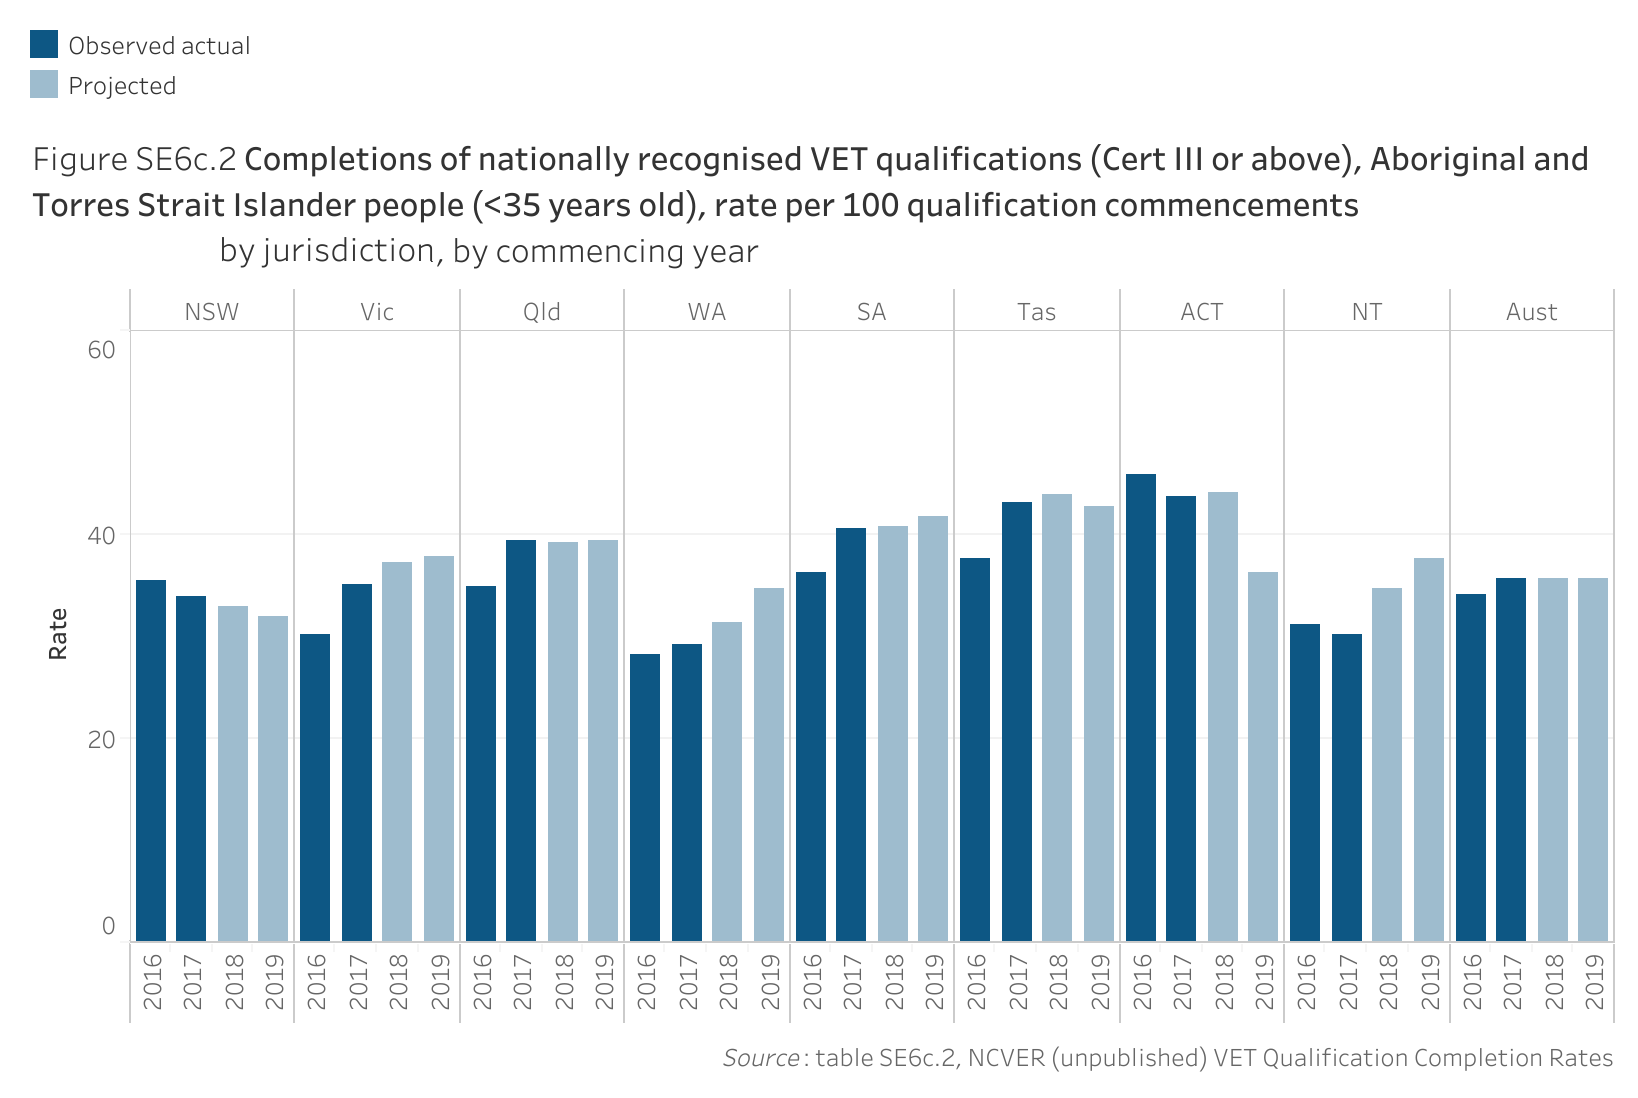 Figure SE6c.2 shows the completions of nationally recognised Vocational Education and Training qualifications (certificate three or above), Aboriginal and Torres Strait Islander people (is less than 35 years old), rate per 100 qualification commencements, by jurisdiction , by commencing year. More details can be found within the text near this image.